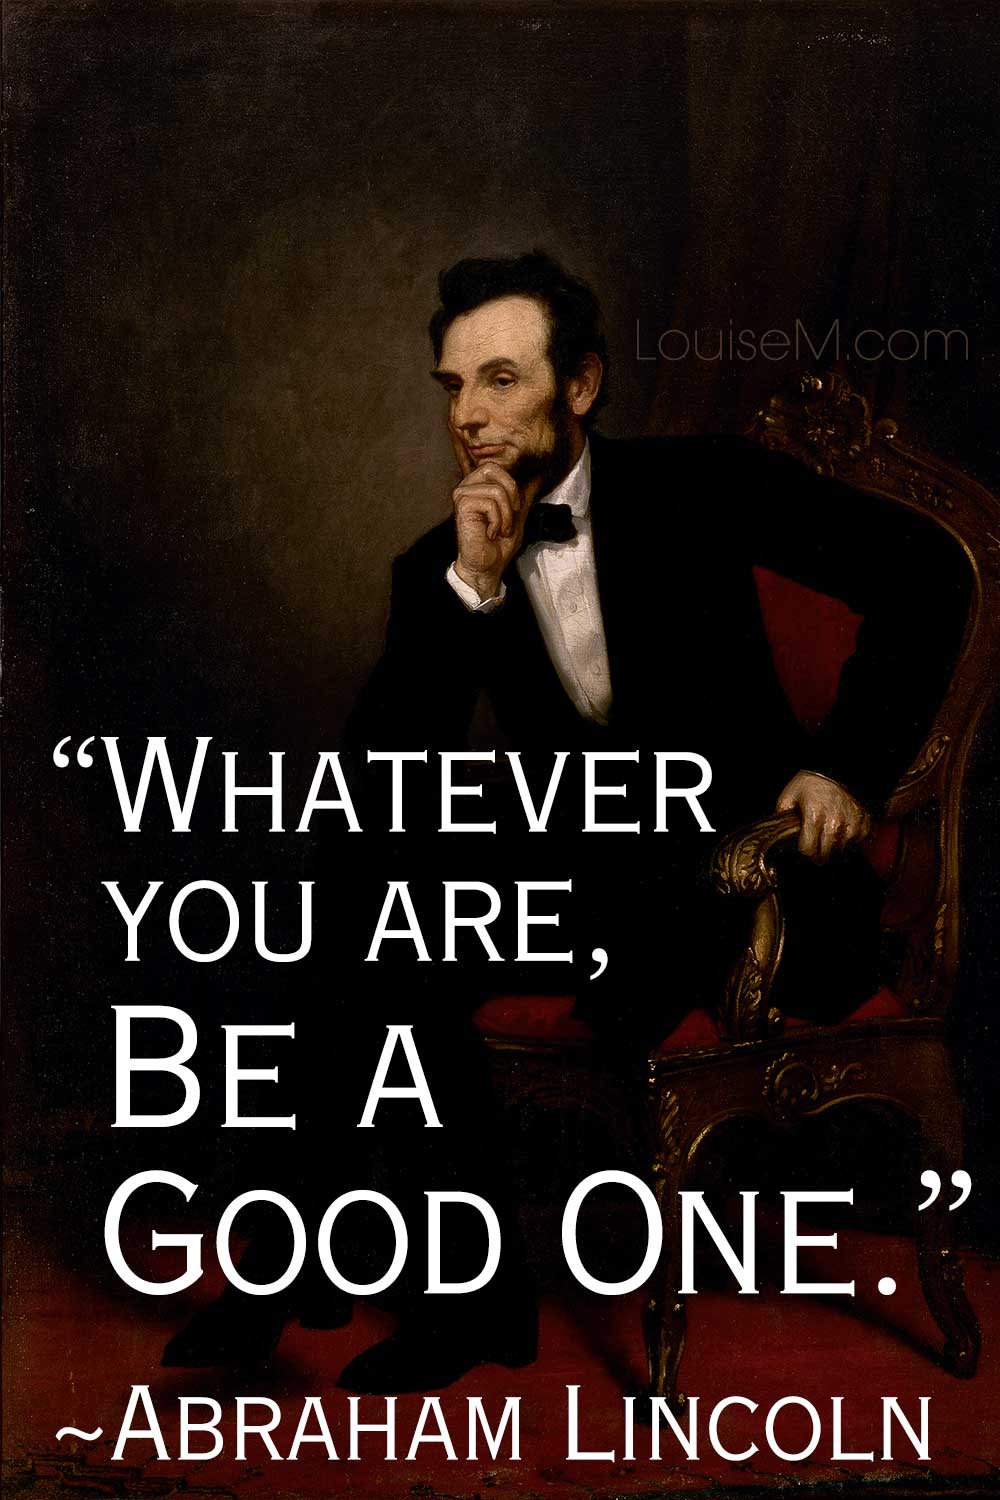 Abraham Lincoln painting with his quote Whatever you are be a good one.